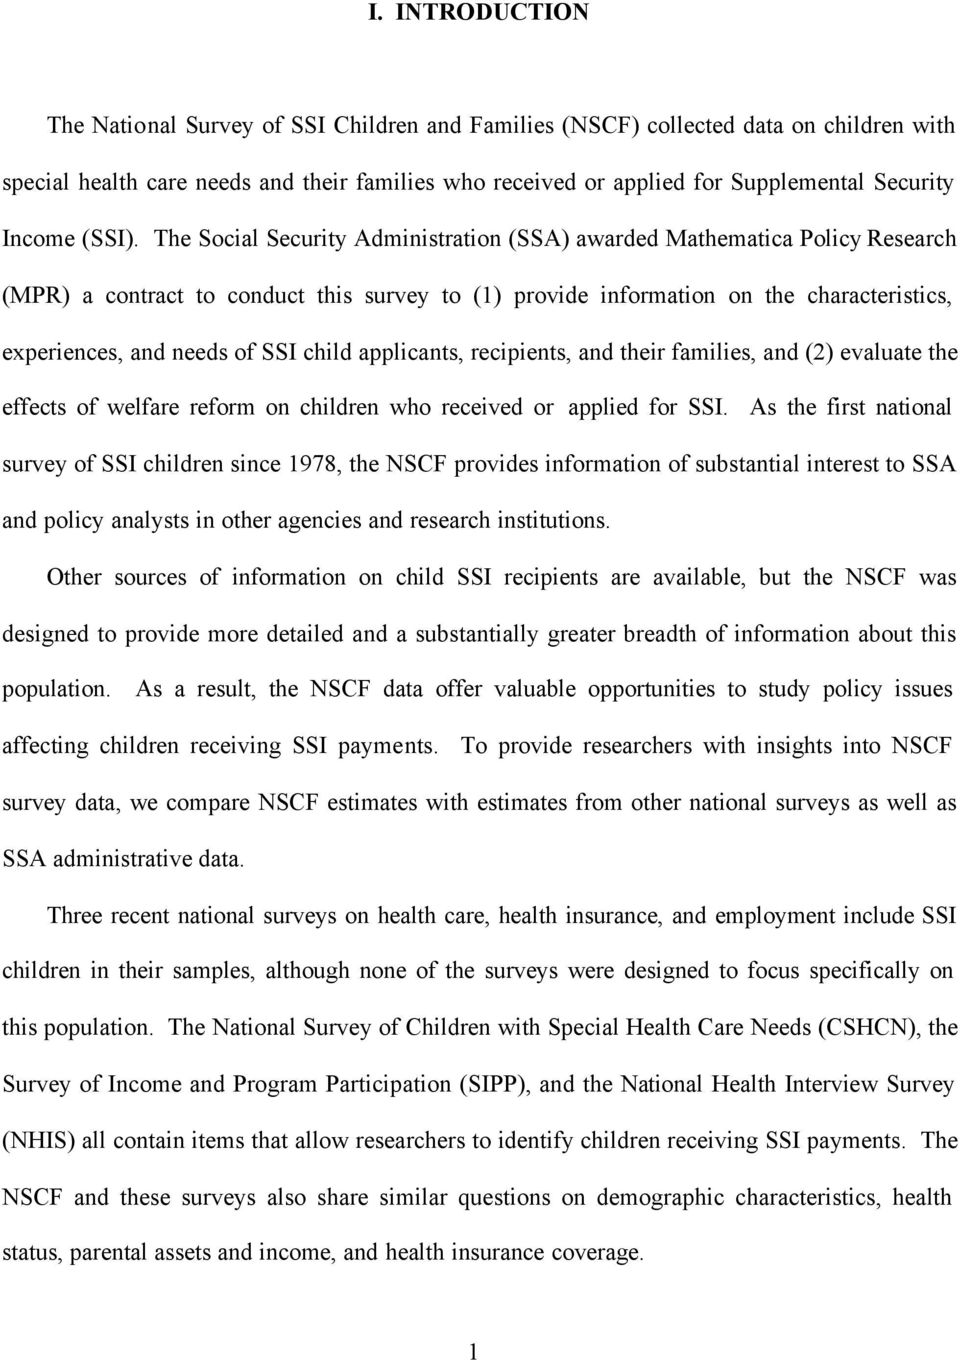 The Social Security Administration (SSA) awarded Mathematica Policy Research (MPR) a contract to conduct this survey to (1) provide information on the characteristics, experiences, and needs of SSI